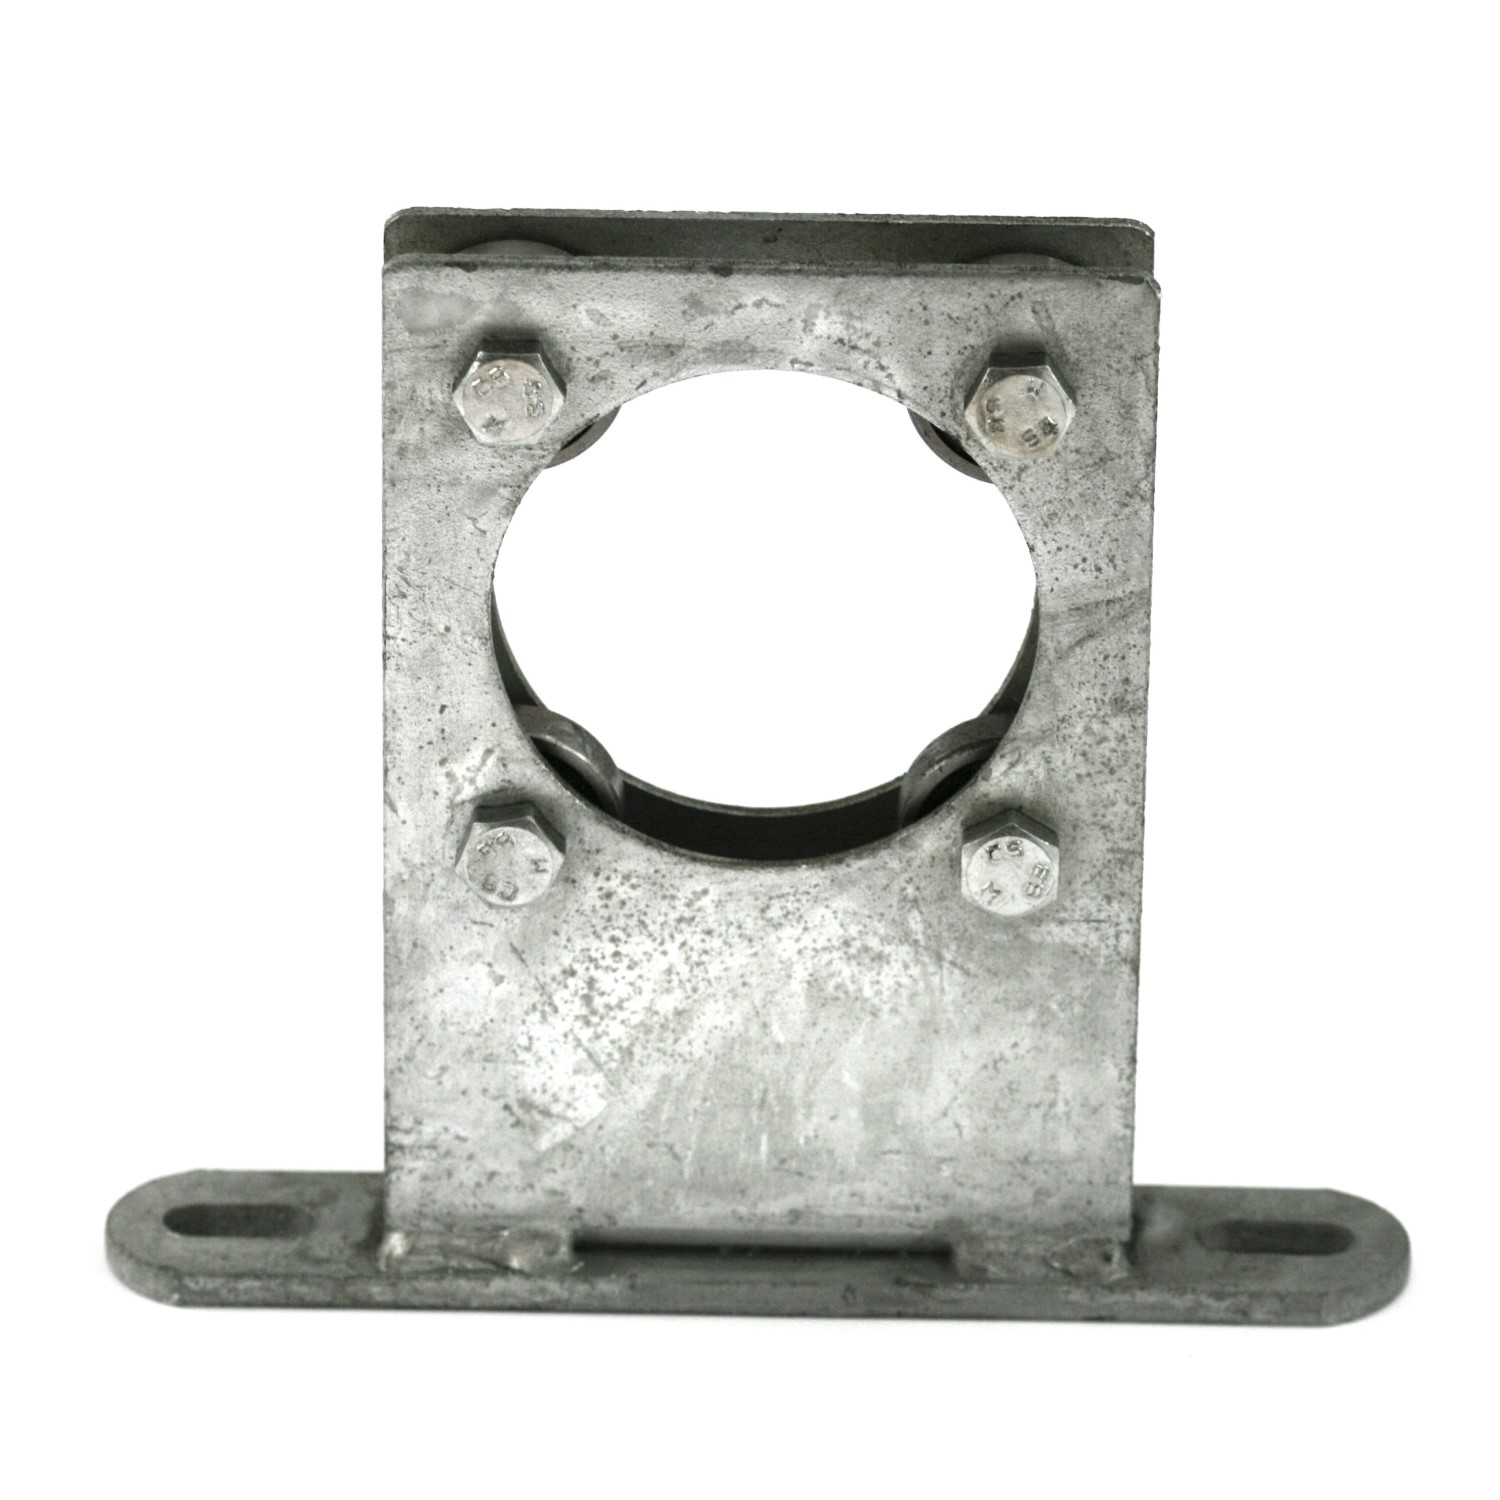 4 bearing shaft support 2" extended - PU = 16 pcs